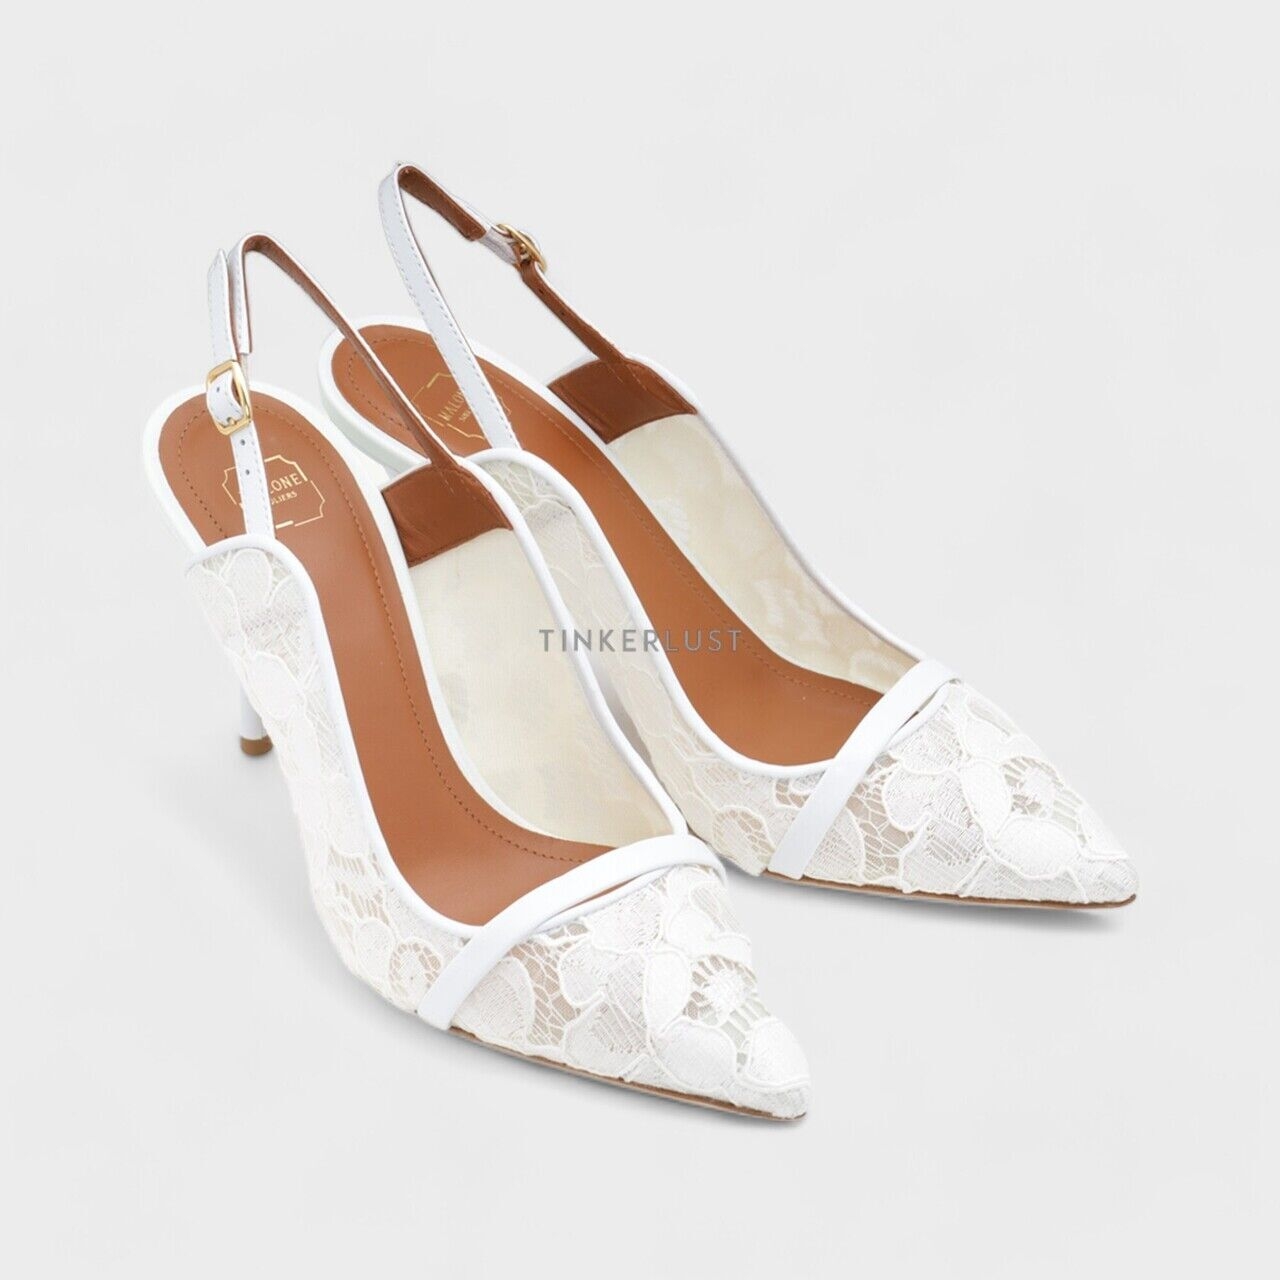 Malone Souliers Marion Lace Bridal Pumps 85mm in White Heels 